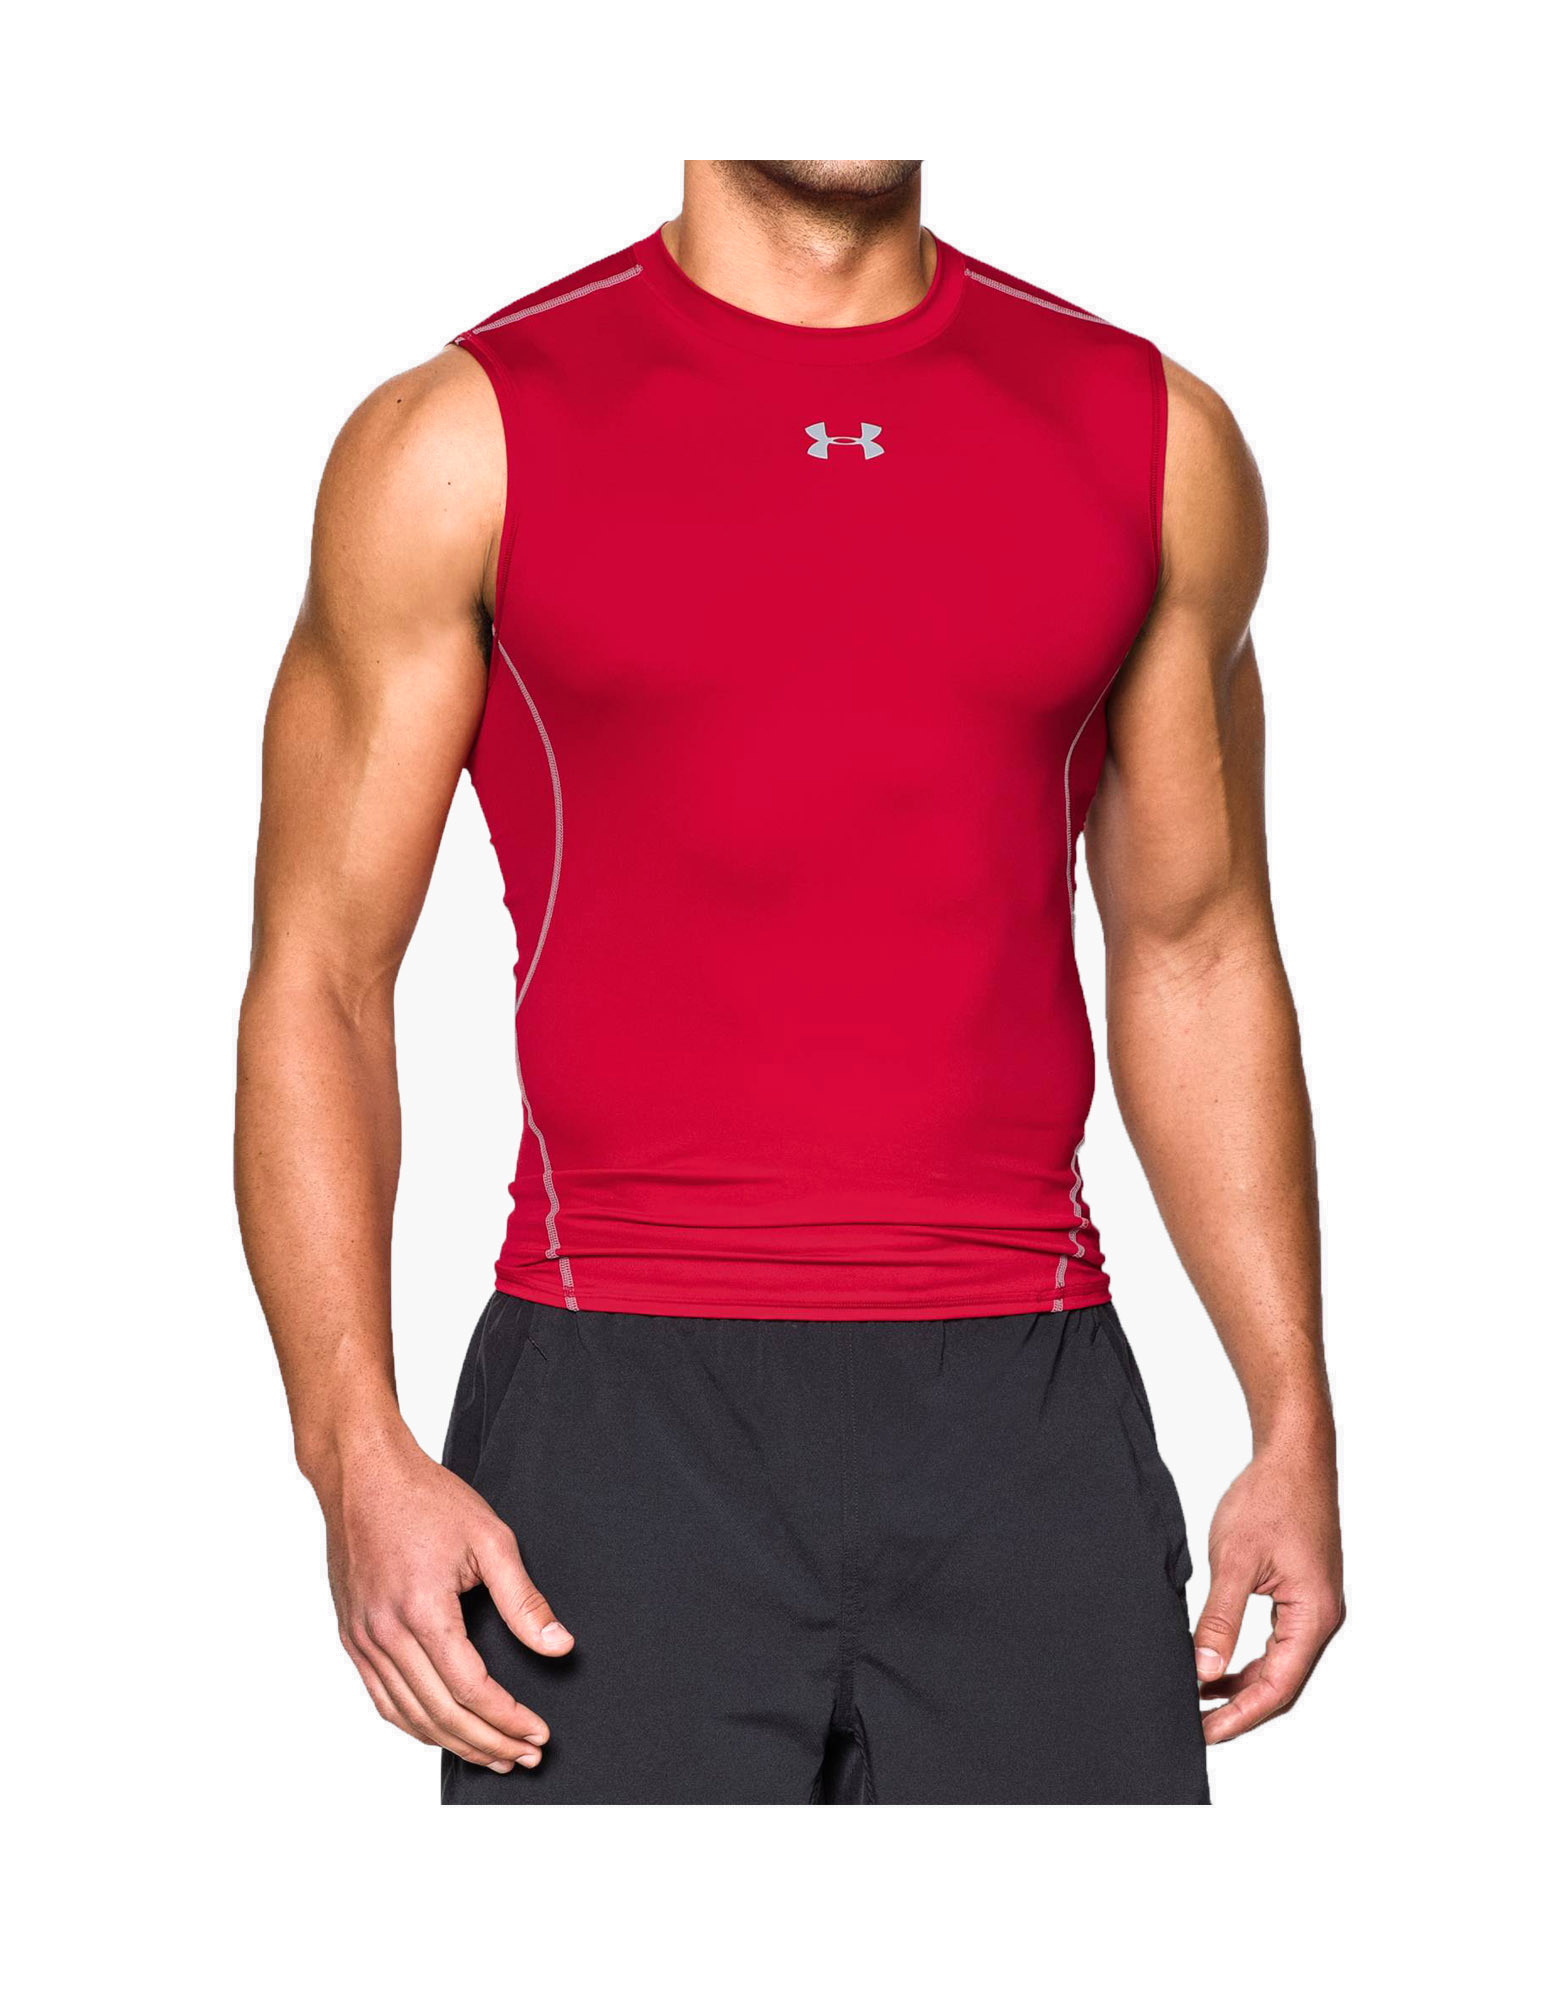 red under armour spandex